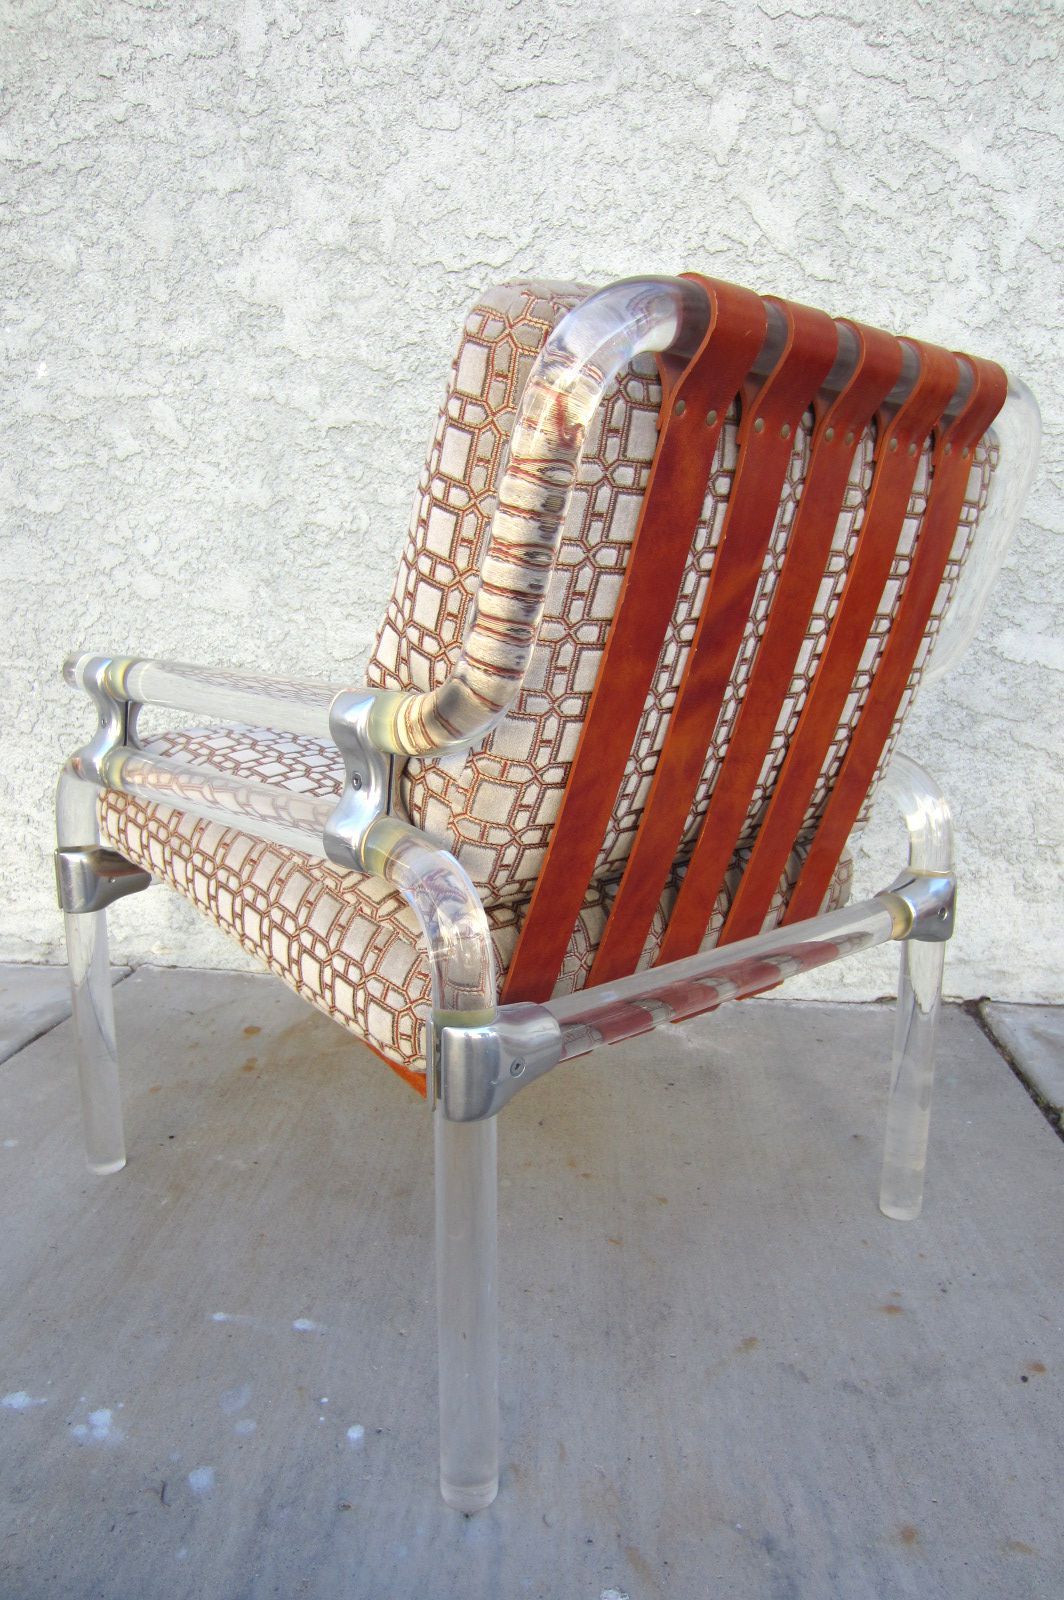 American Lucite Sculpture Lounge Chairs by Jeff Messerschmidt circa 1970s